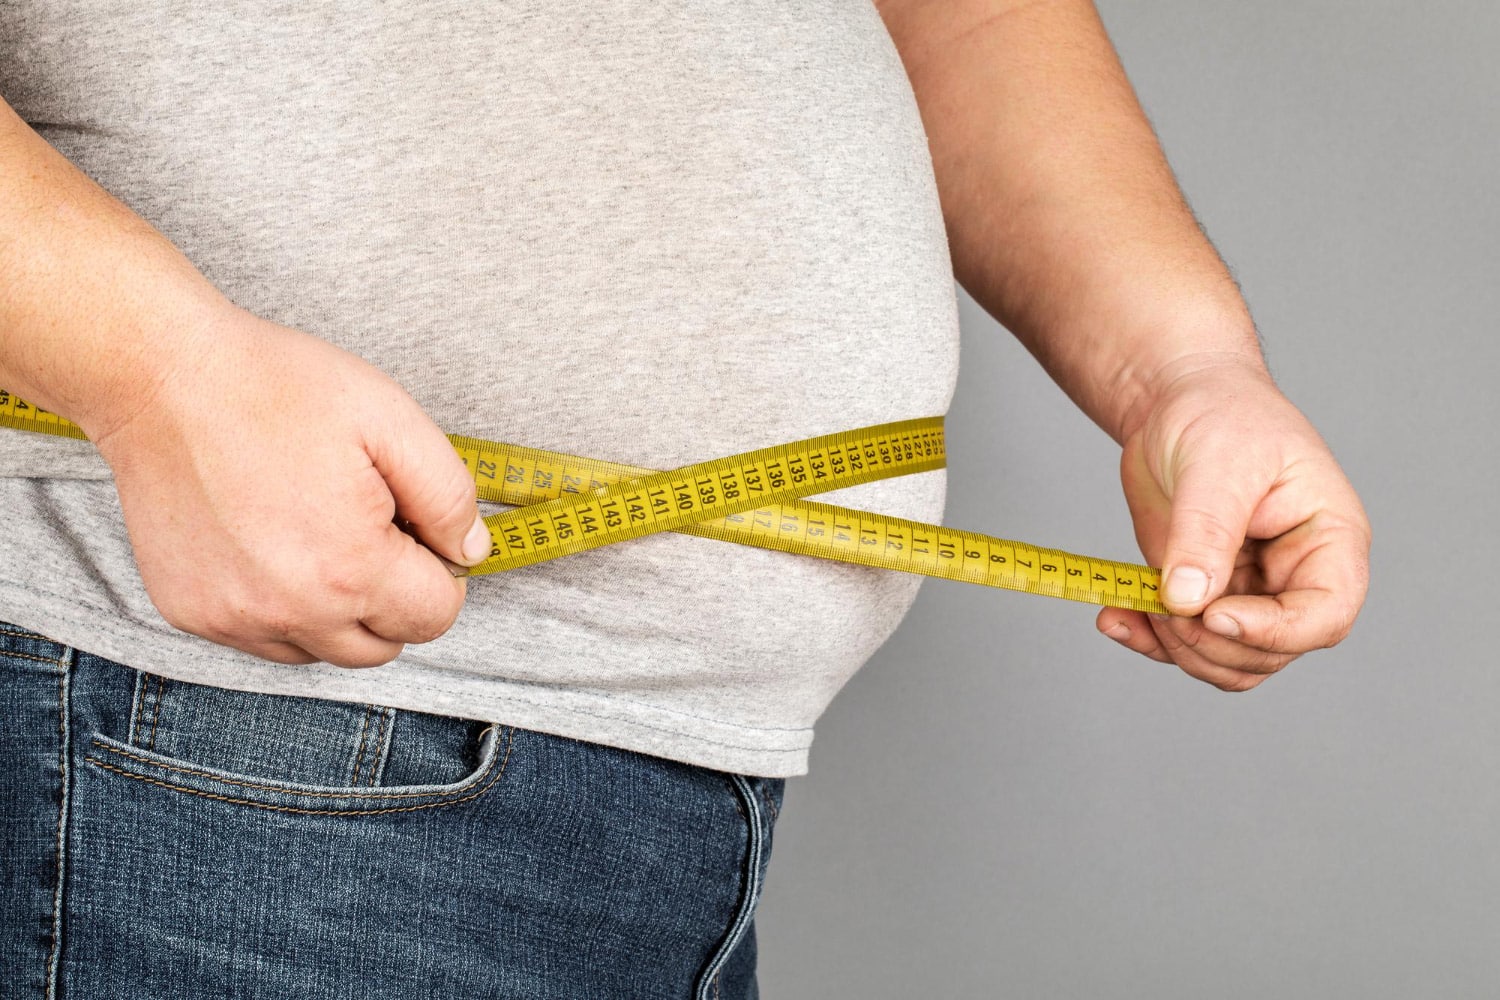 Image showing a man measures his fat belly with a measuring tape on a gray background.